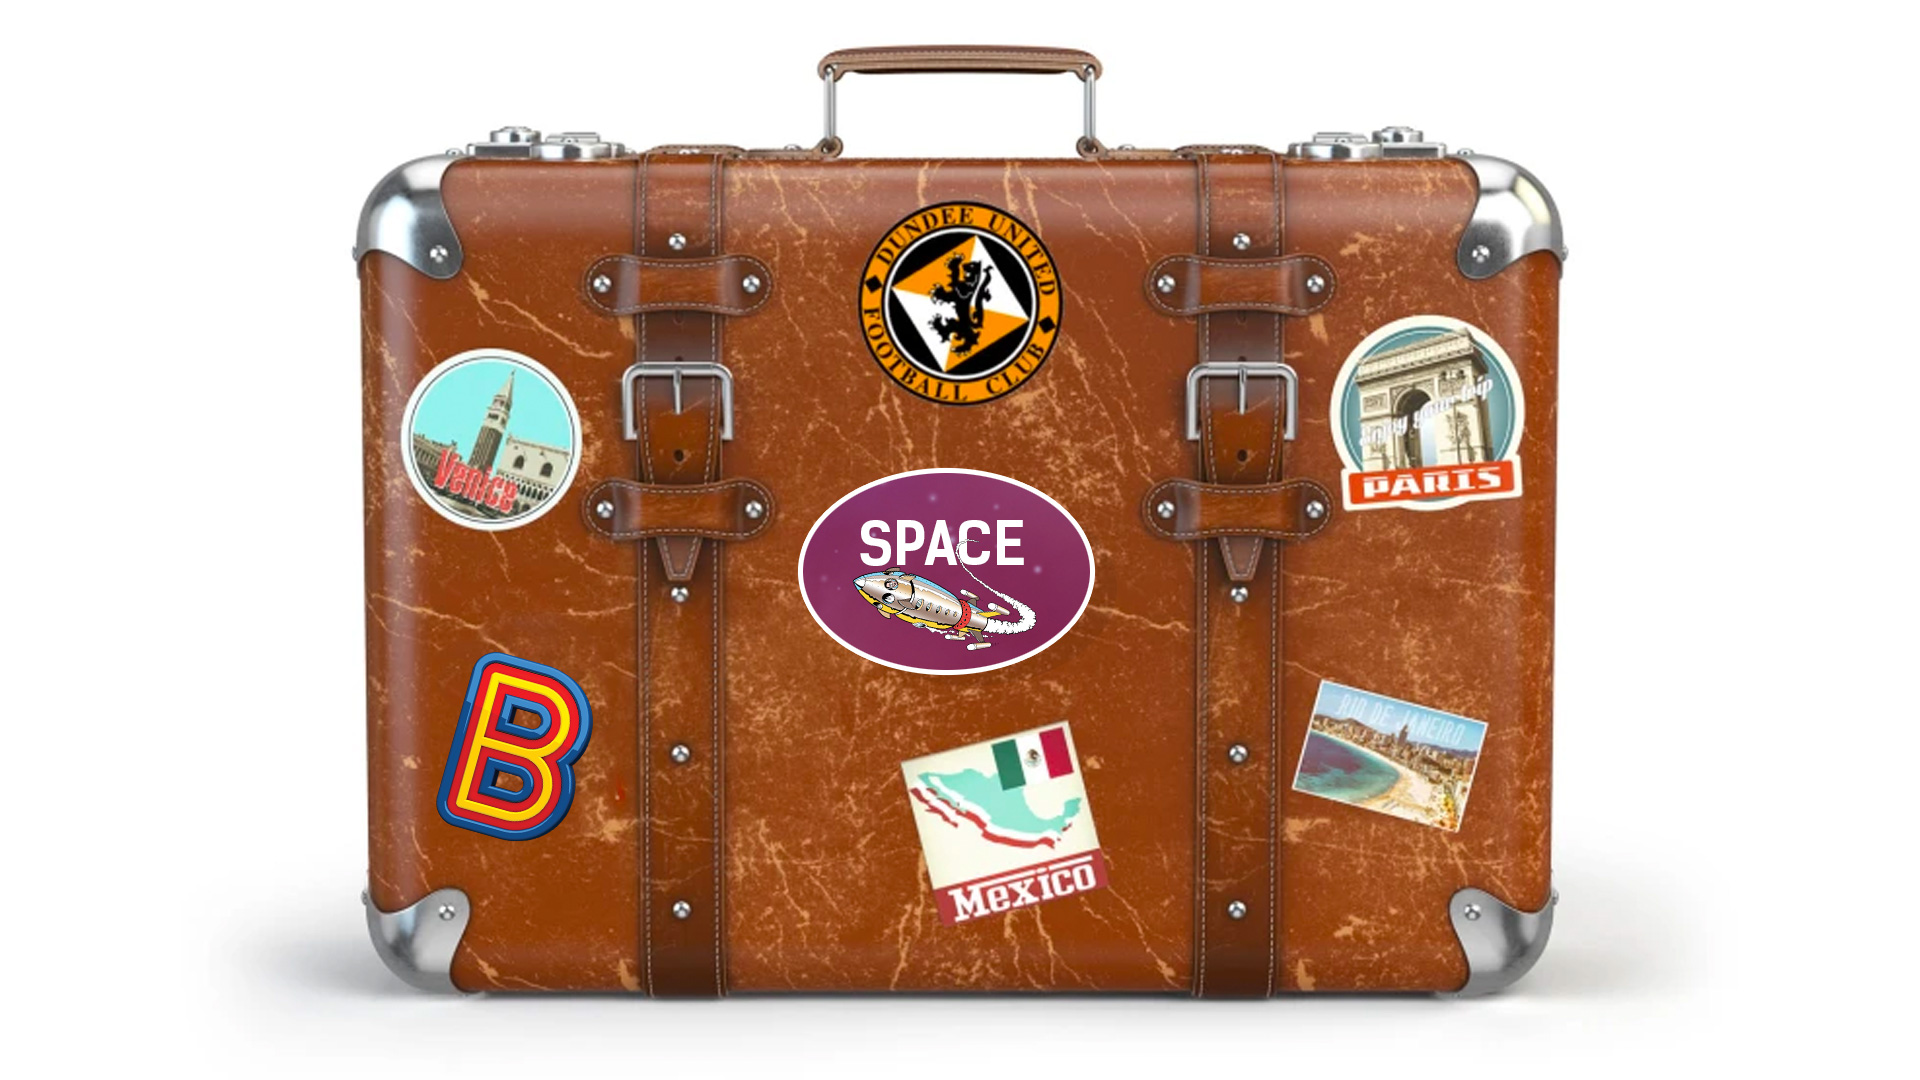 Space suitcase